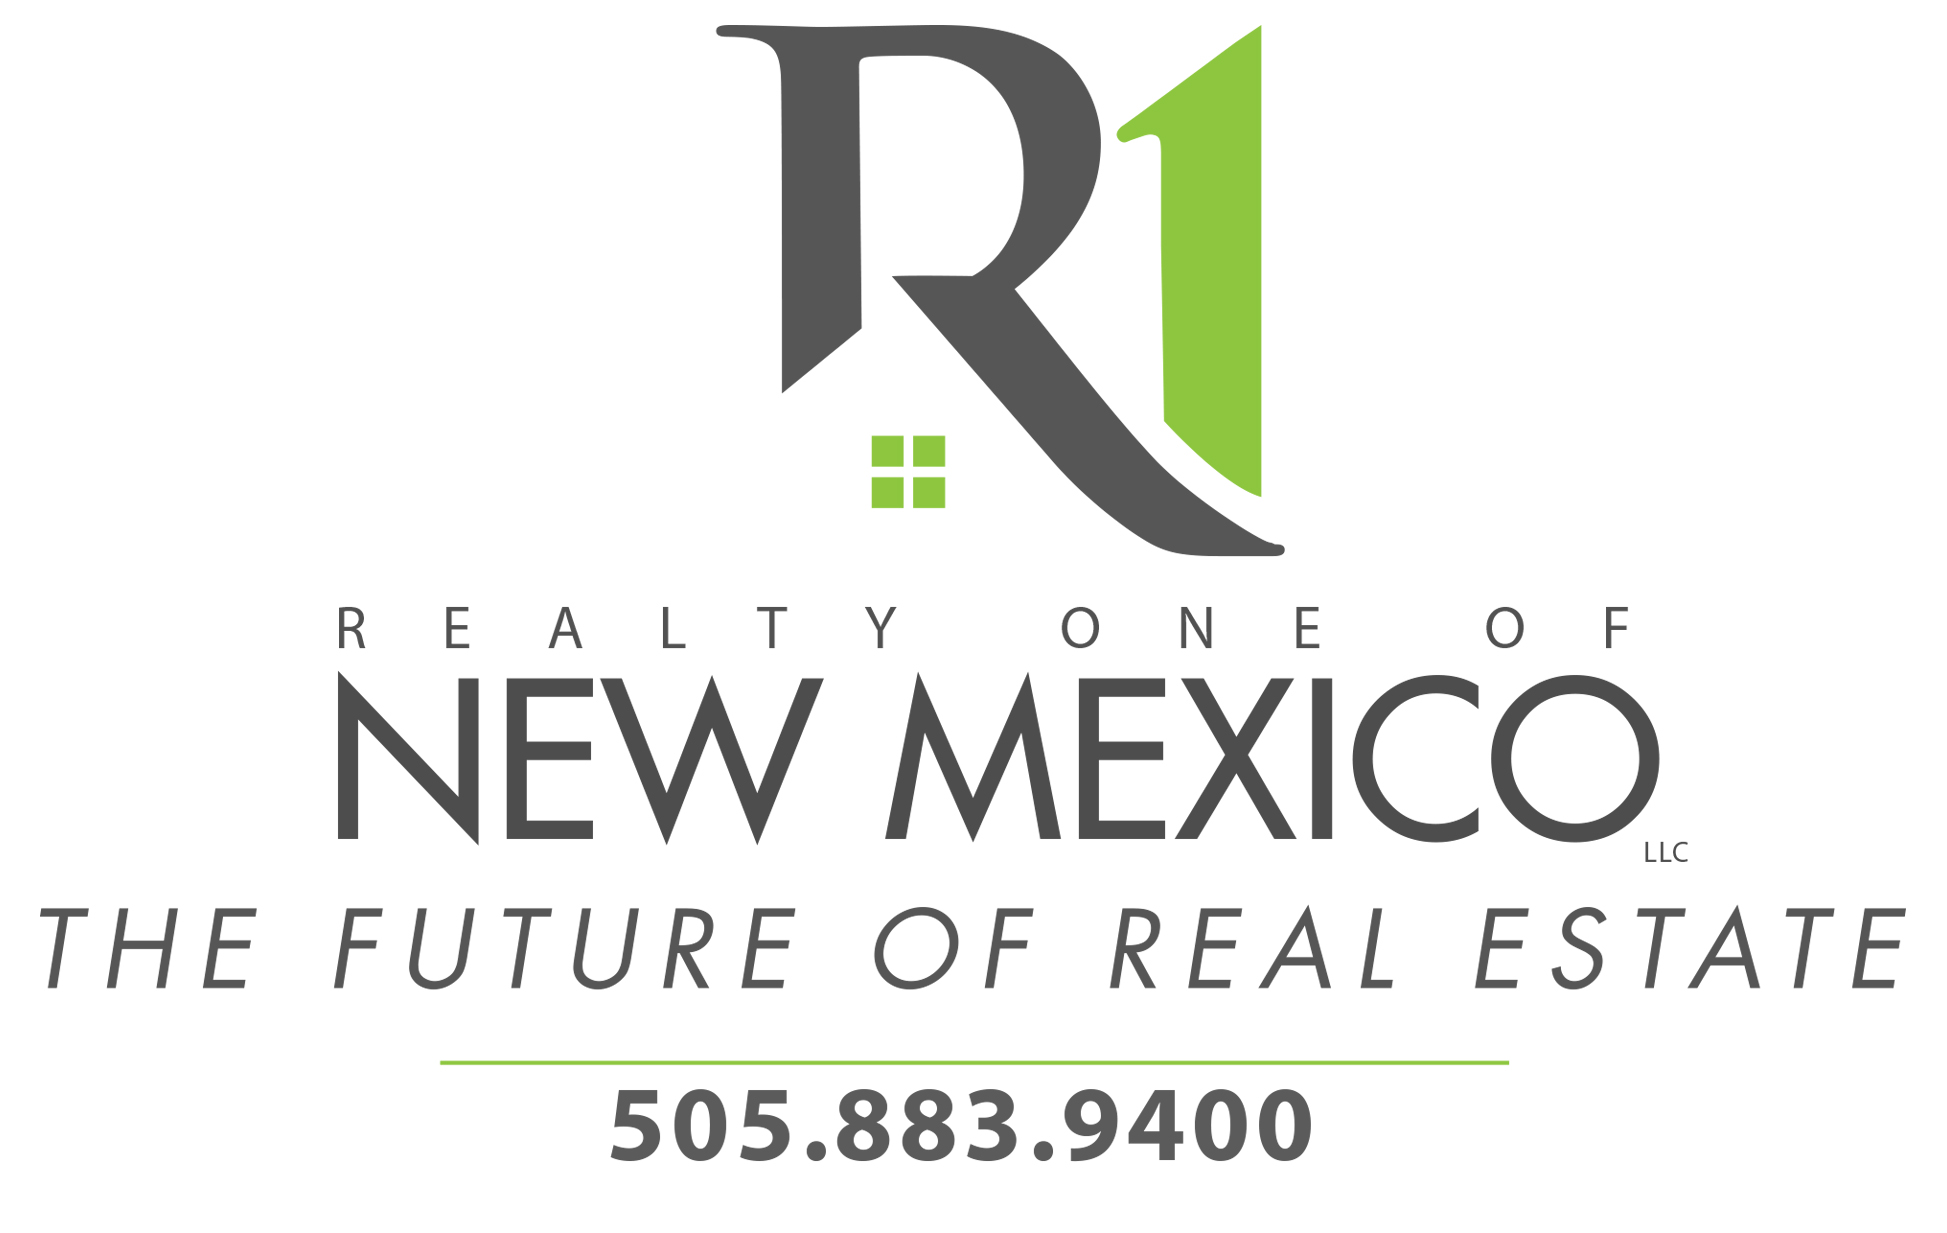 Tim and Karen Brown, Realty One of New Mexico